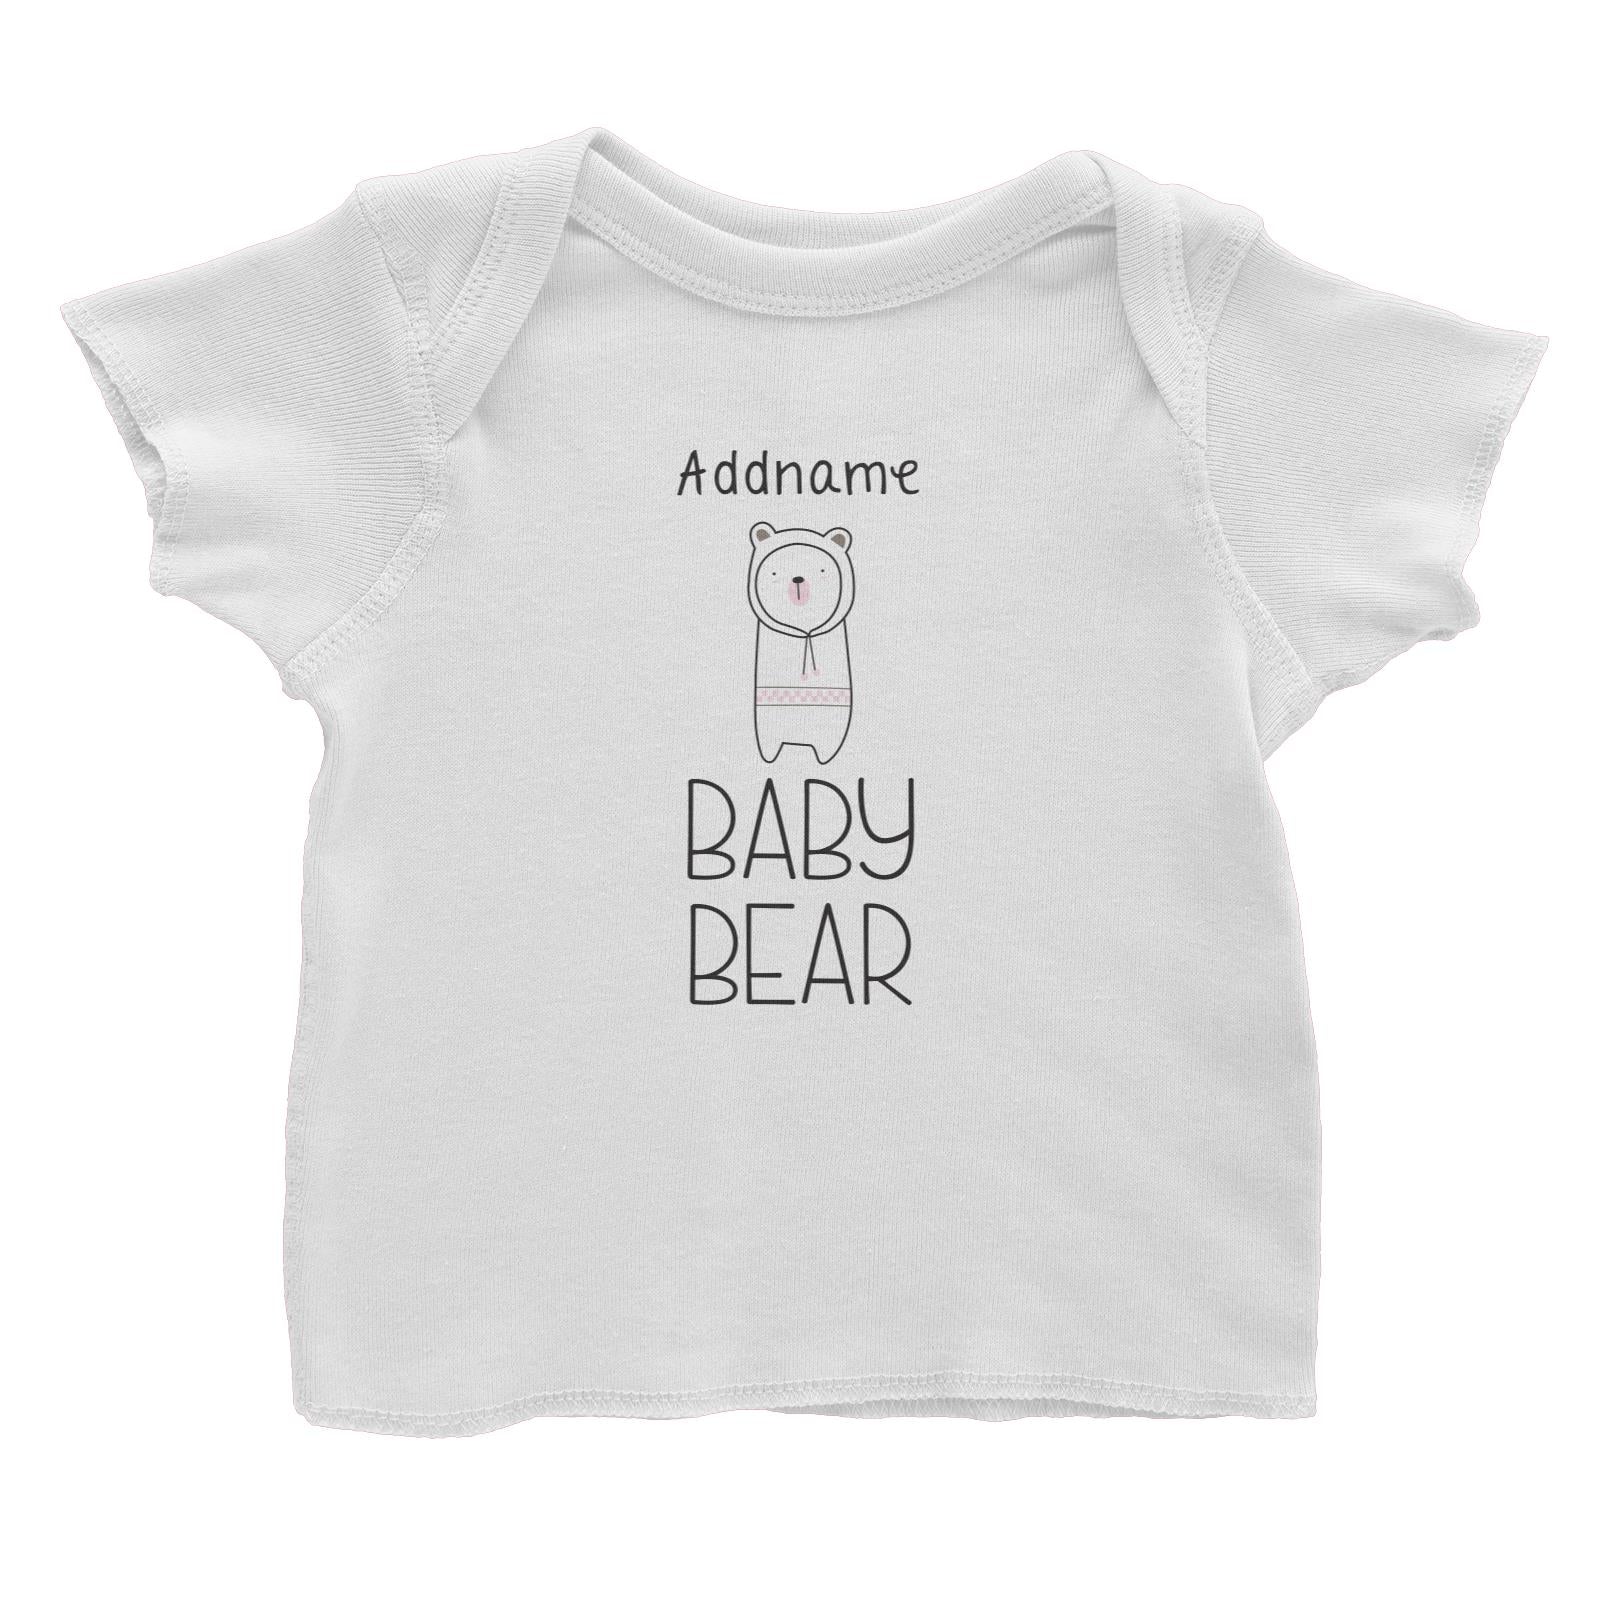 Cute Animals and Friends Series 2 Bear Addname Baby Bear Baby T-Shirt